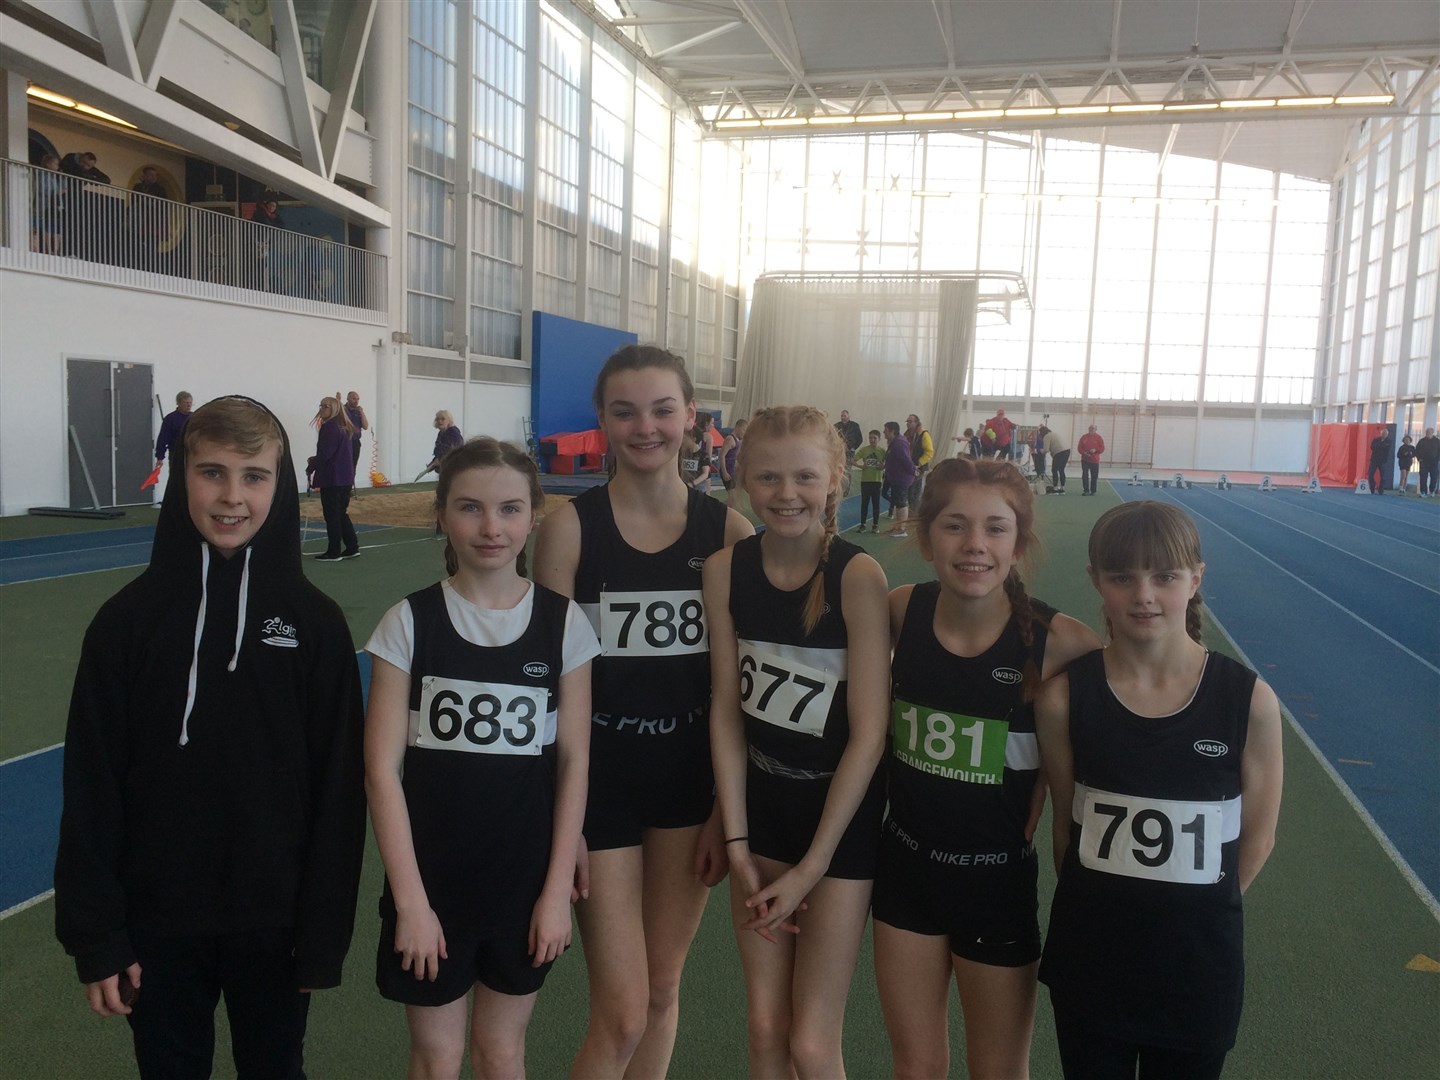 Doing Elgin AAC proud in the National age group championships at Glasgow’s Emirates Arena were under-13 athletes Lucas Powditch, Ava Cruickshank, Lexi Grant, Lillia Clarke, Holly Whittaker and Tayla-Jai Greenfield.